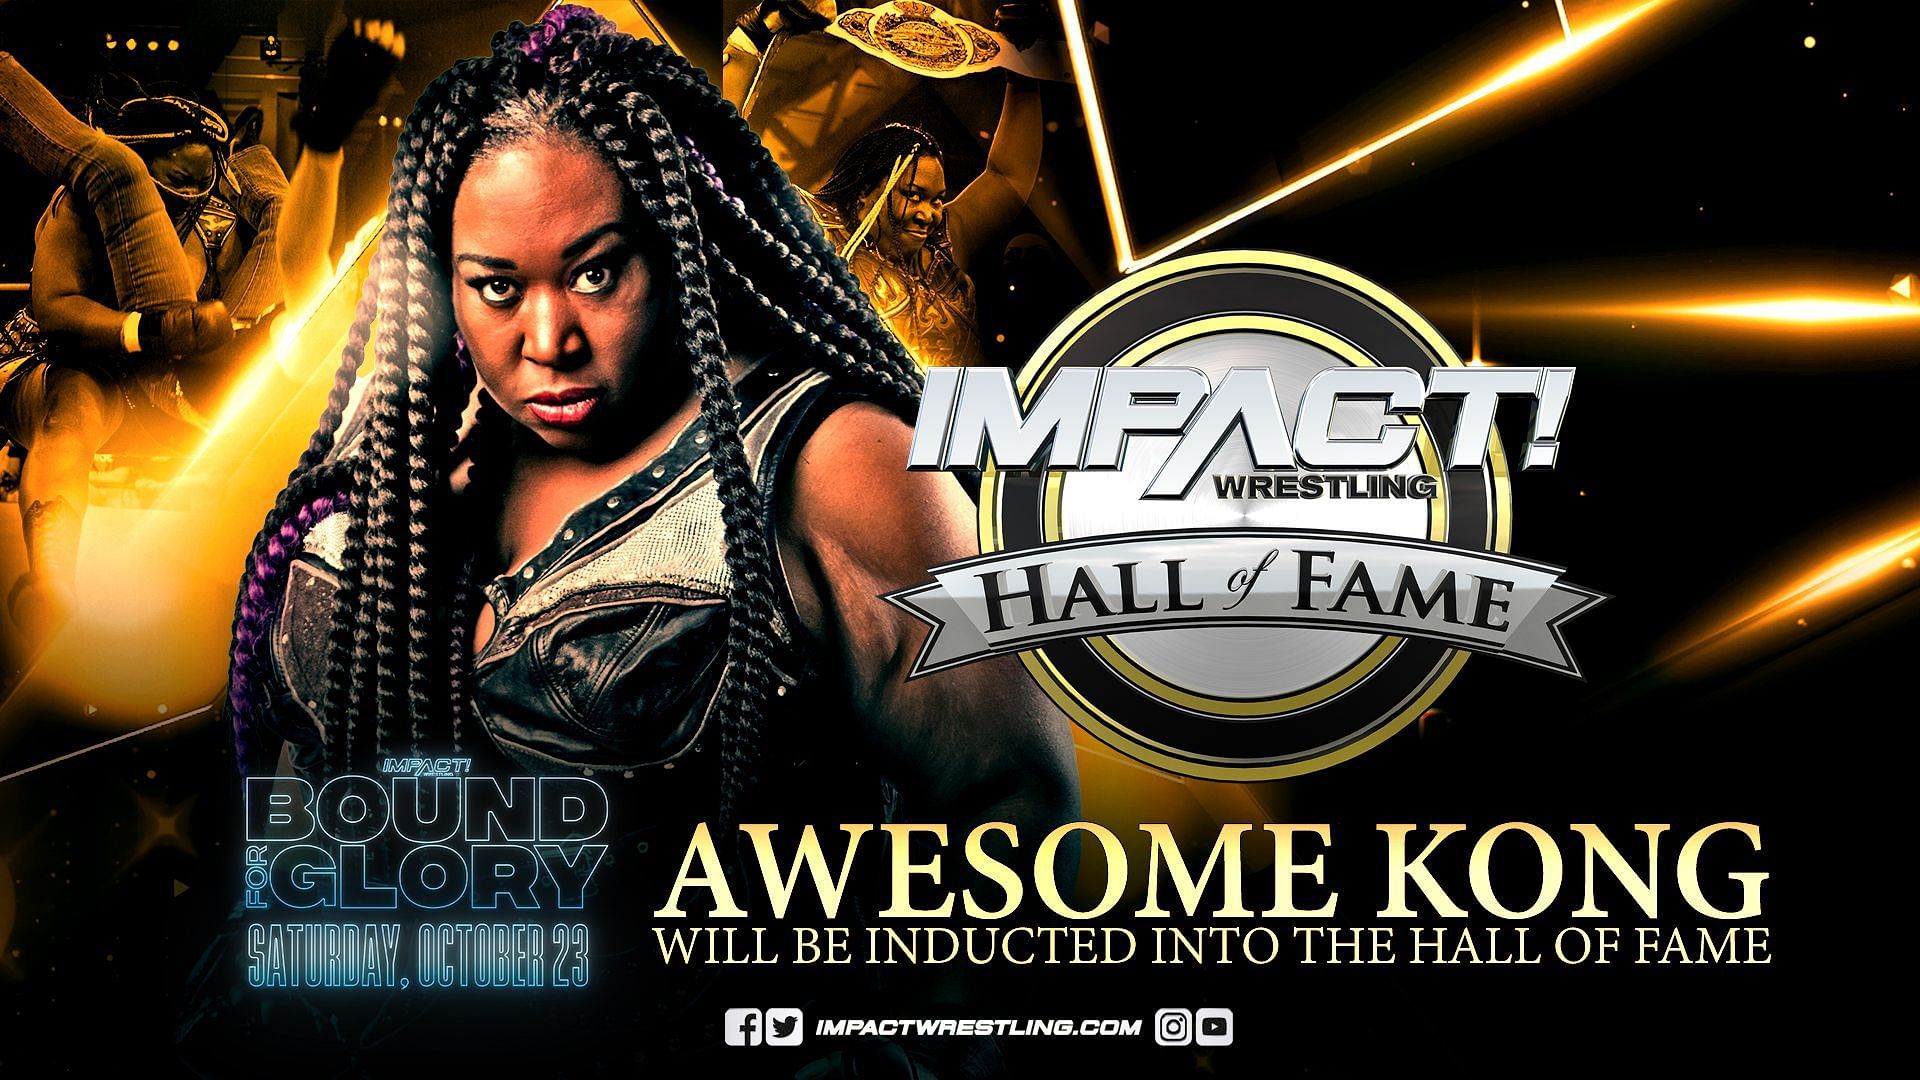 Congratulations to Awesome Kong for entering the IMPACT Wrestling Hall of Fame